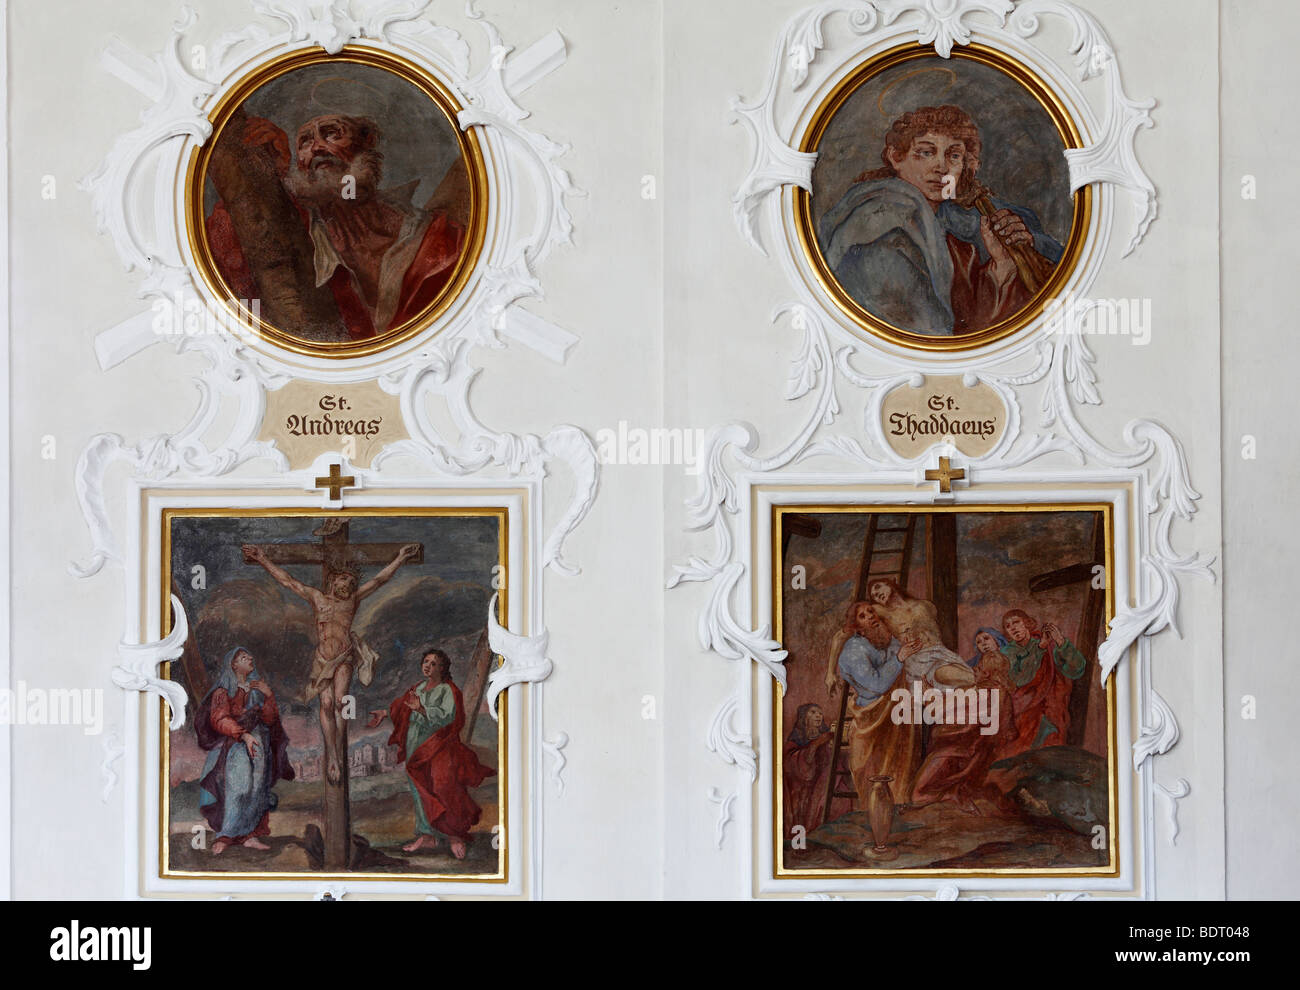 Apostles, St. Andrew and St. Thaddeus, paintings by Angelica Kauffmann, Stations of the Cross paintings by Joseph Kauffmann, Pa Stock Photo